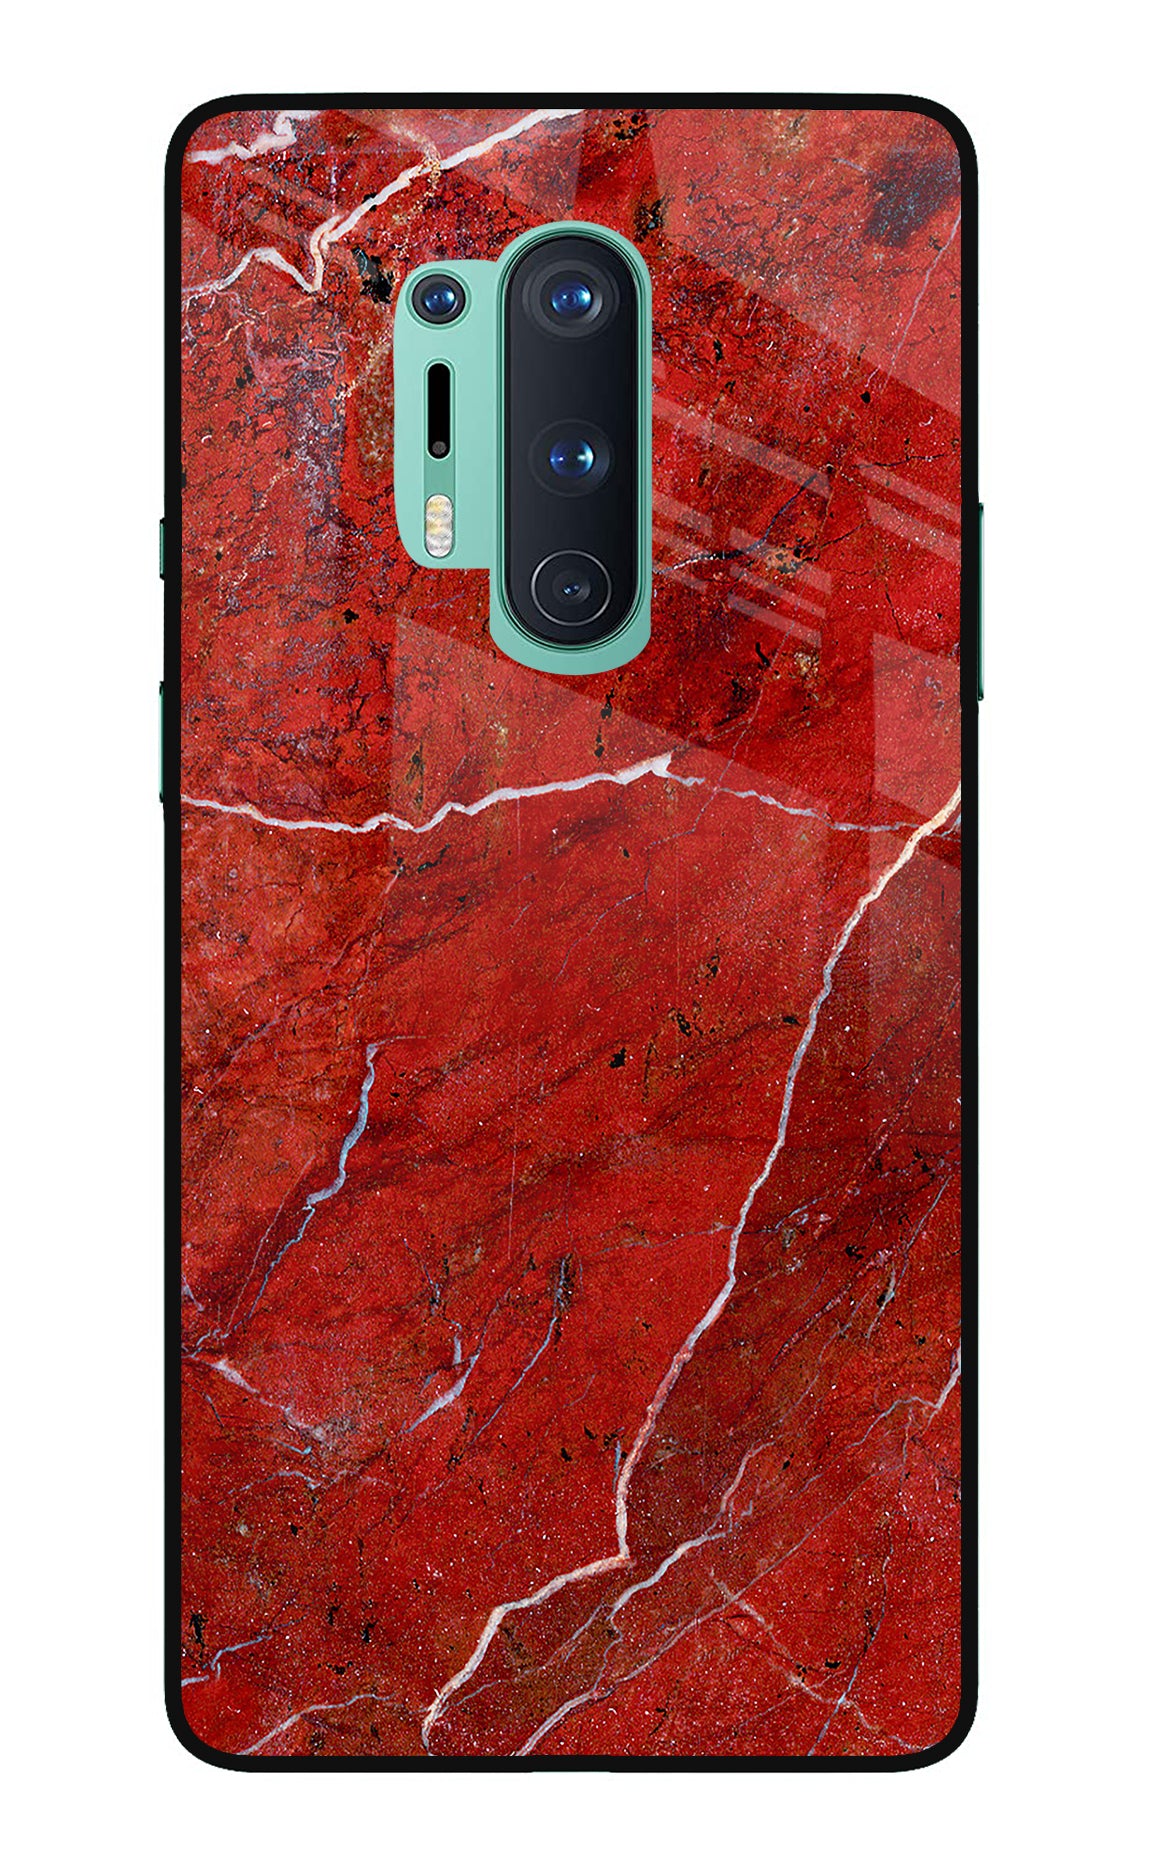 Red Marble Design Oneplus 8 Pro Back Cover